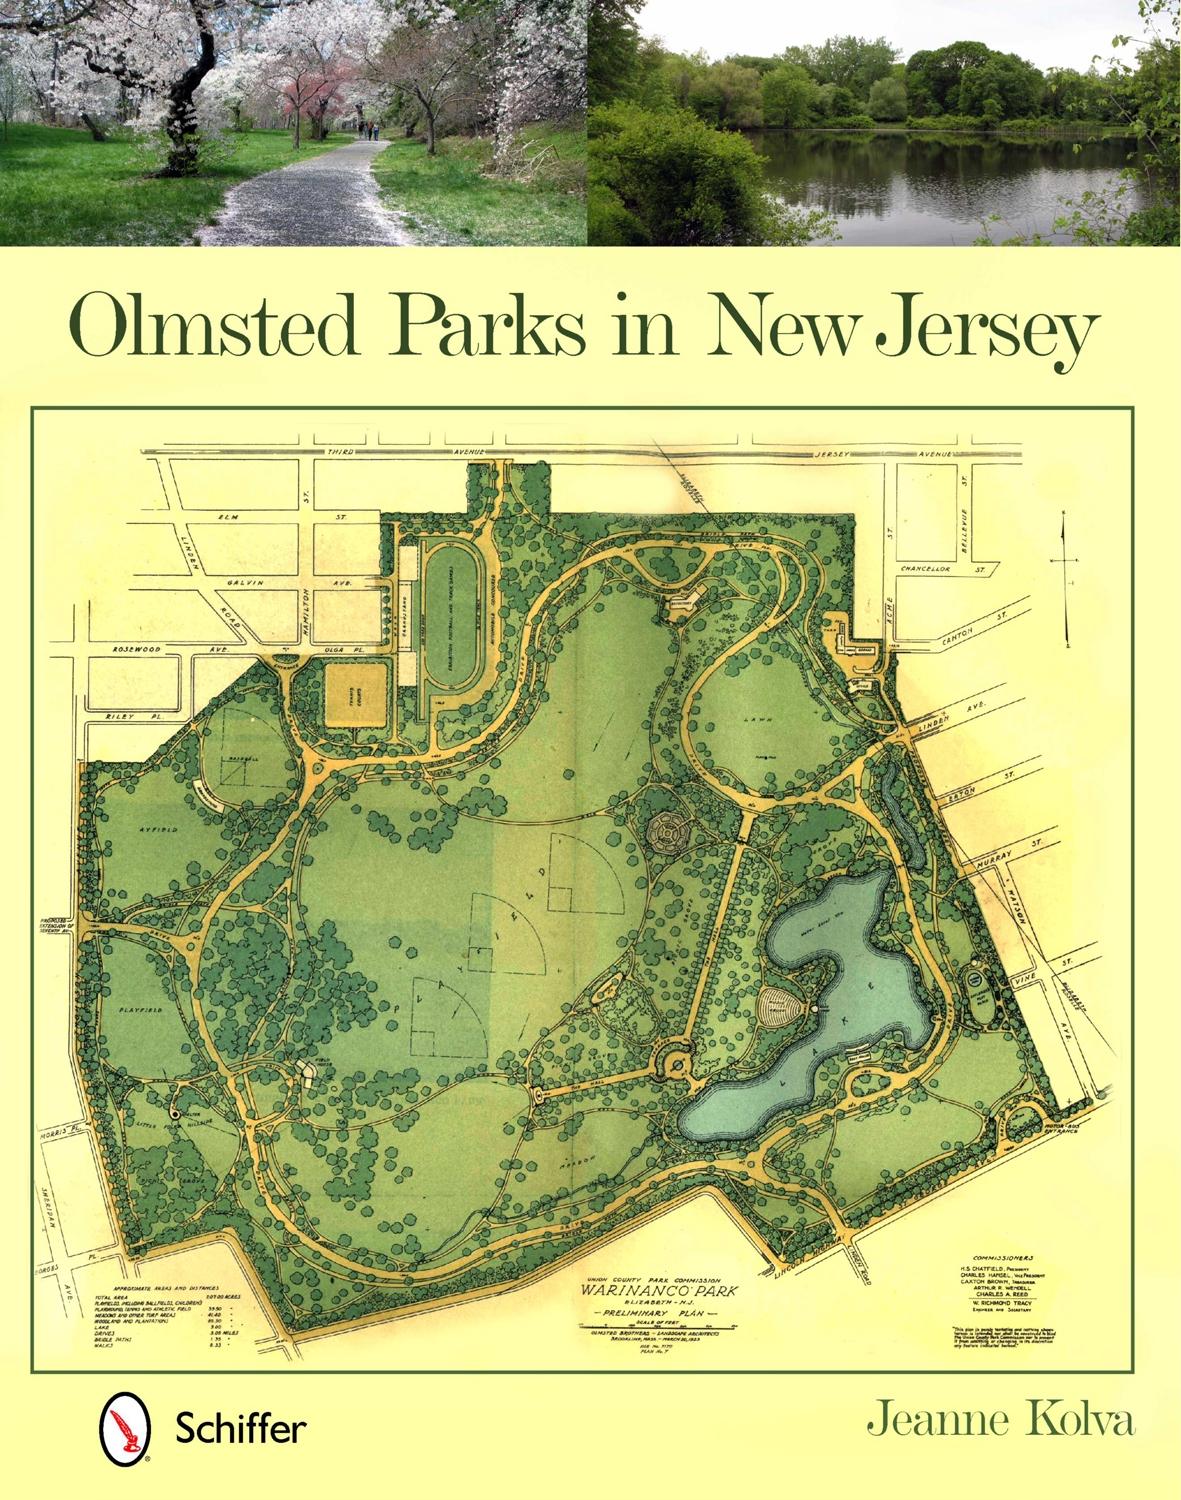 OLMSTED PARKS IN NEW JERSEY